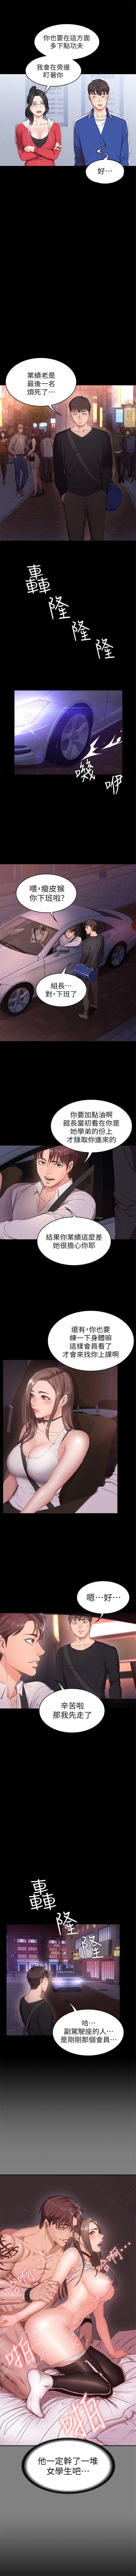 Cowgirl 健身教練 1-57 官方中文（連載中） Cfnm - Page 5